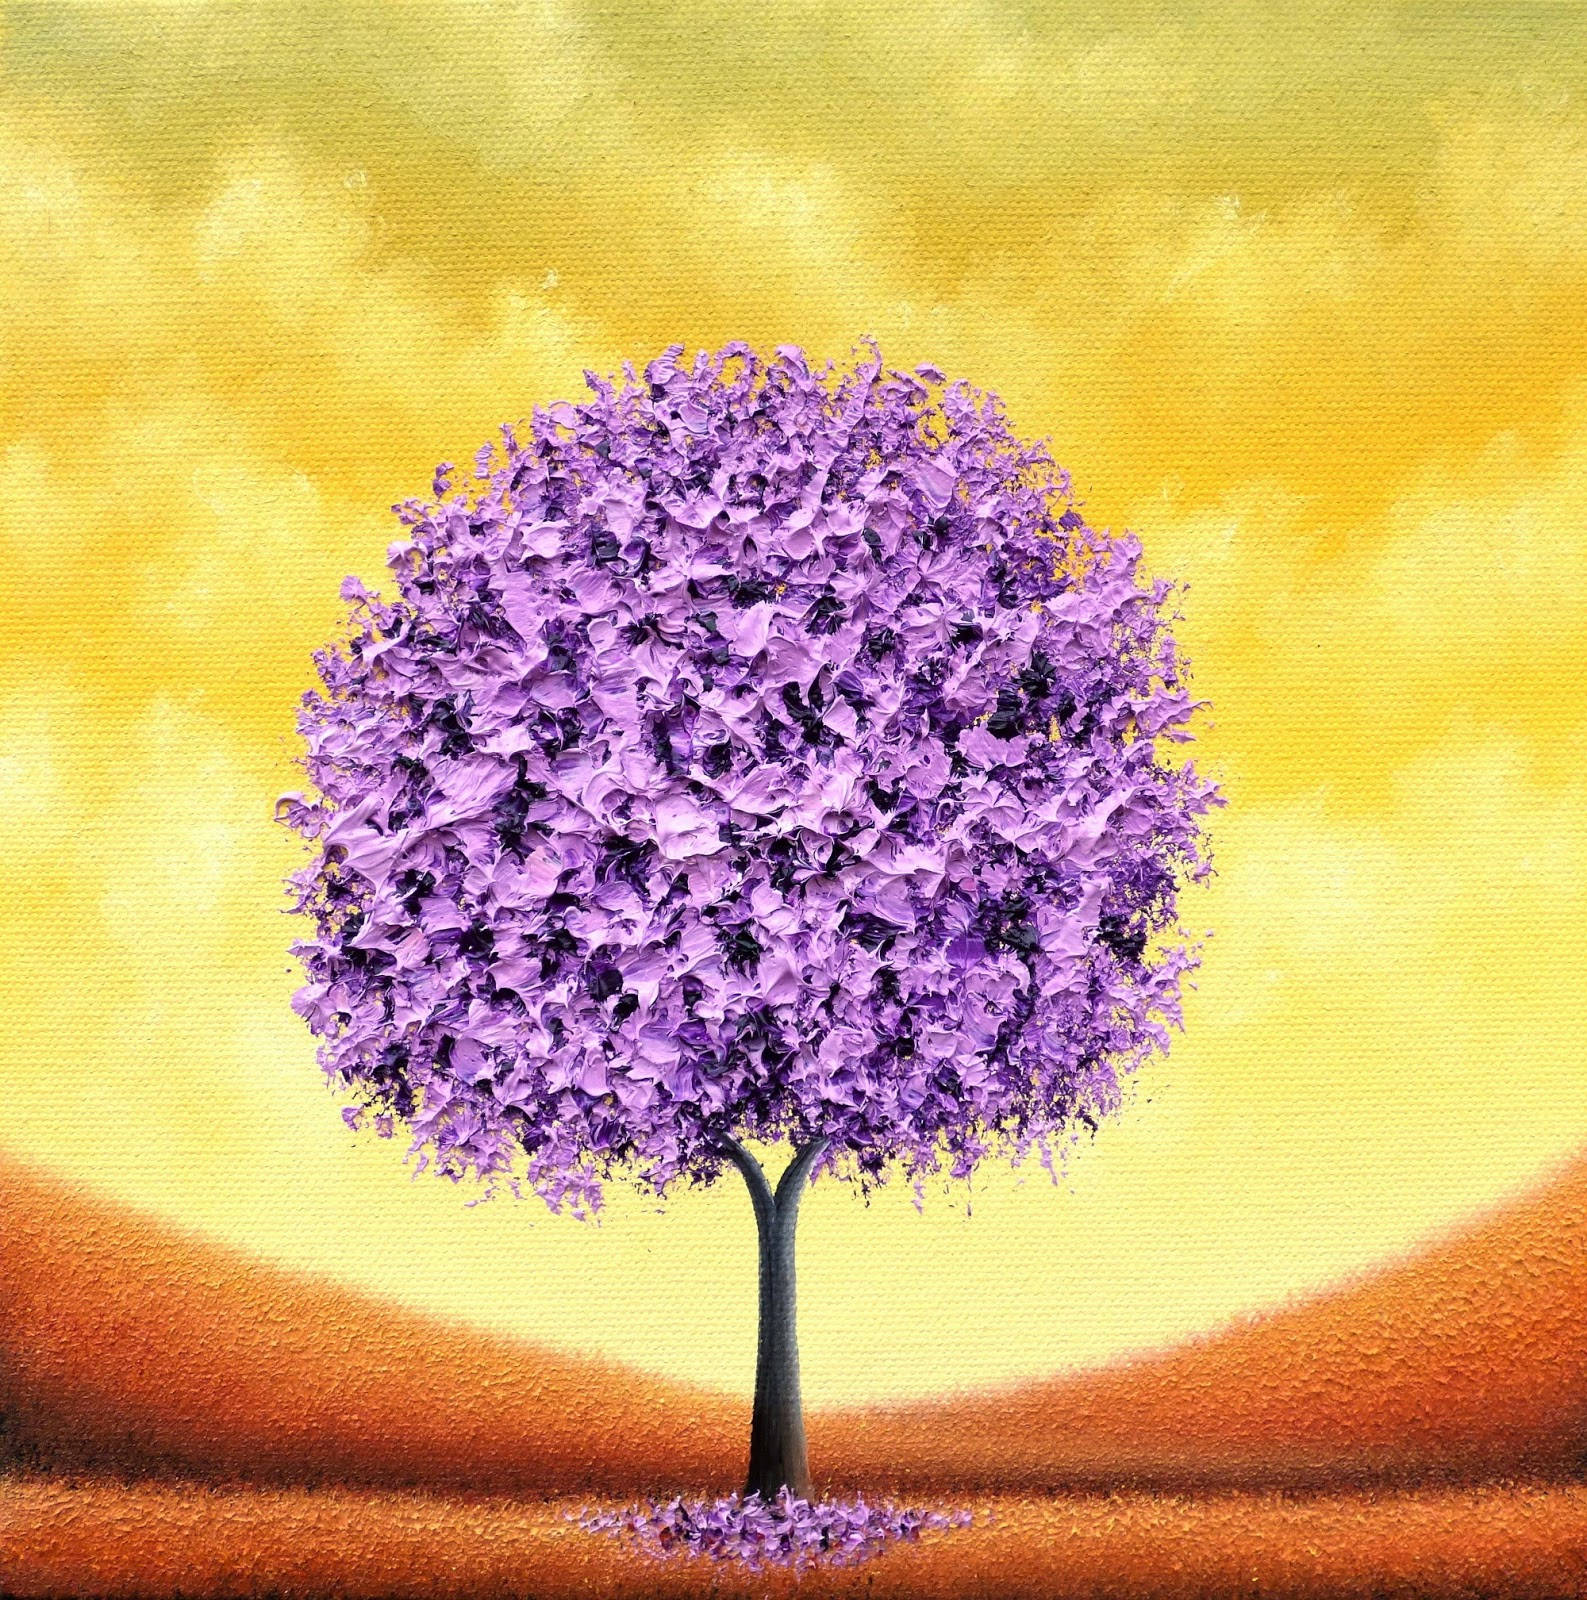 Captivating Purple Tree In An Oil Painting Wallpaper